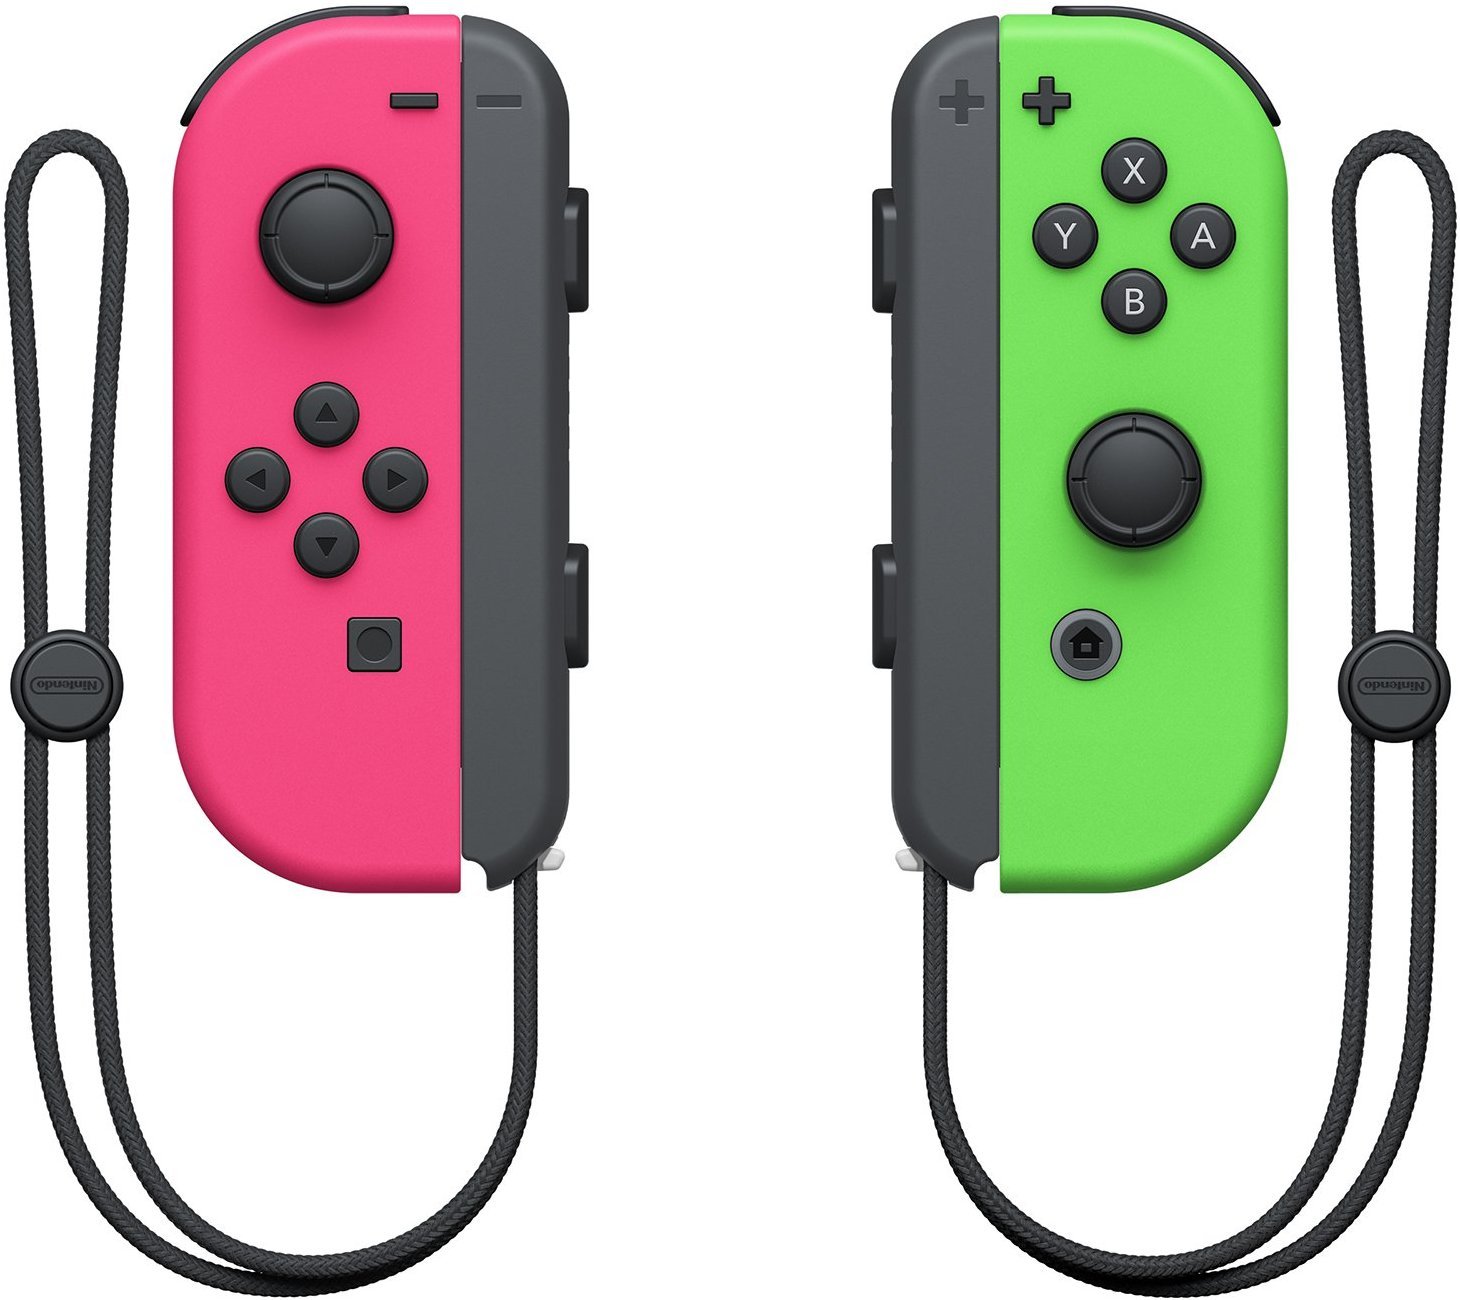 Neon Pink and Neon Green Joy-Cons